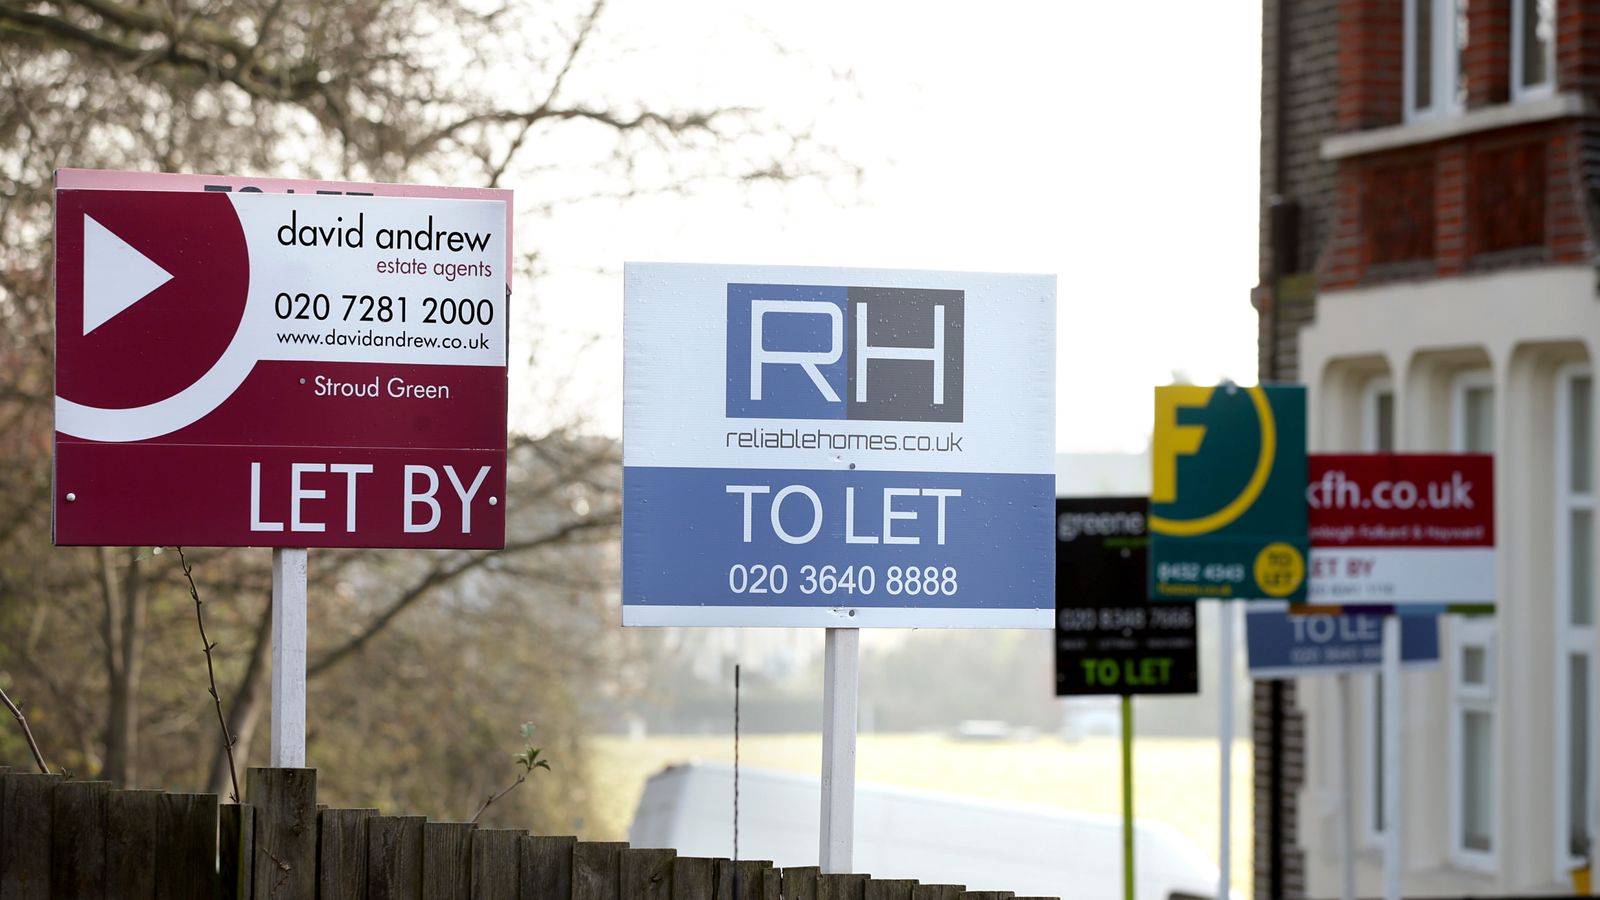 More than 100 MPs earn over £10,000 a year as landlords